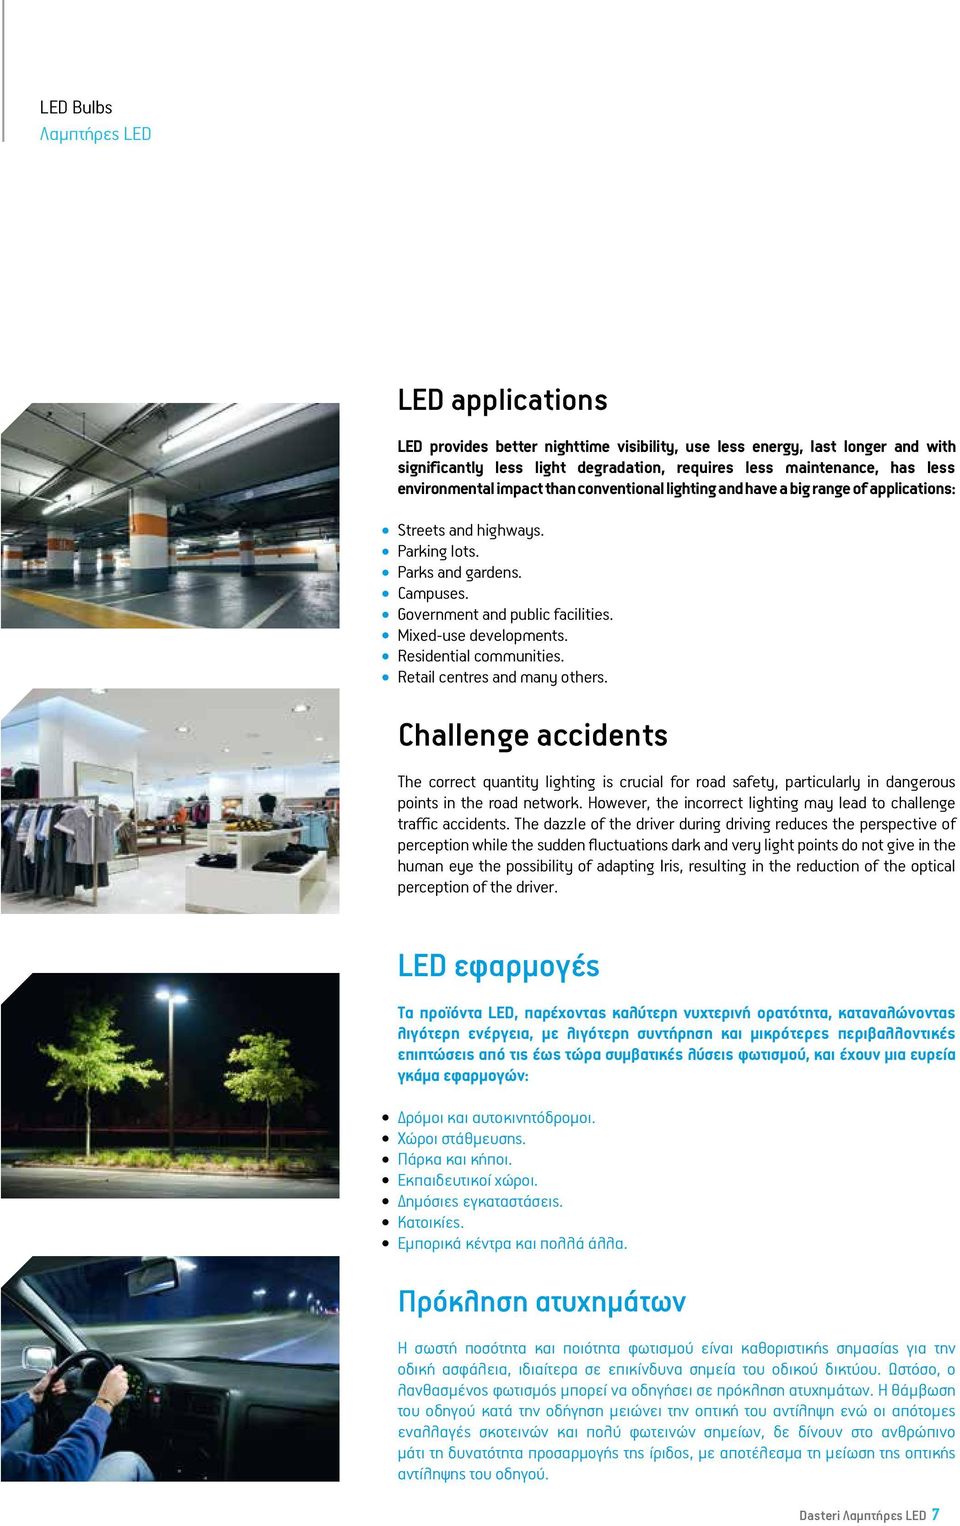 Residential communities. Retail centres and many others. Challenge accidents The correct quantity lighting is crucial for road safety, particularly in dangerous points in the road network.